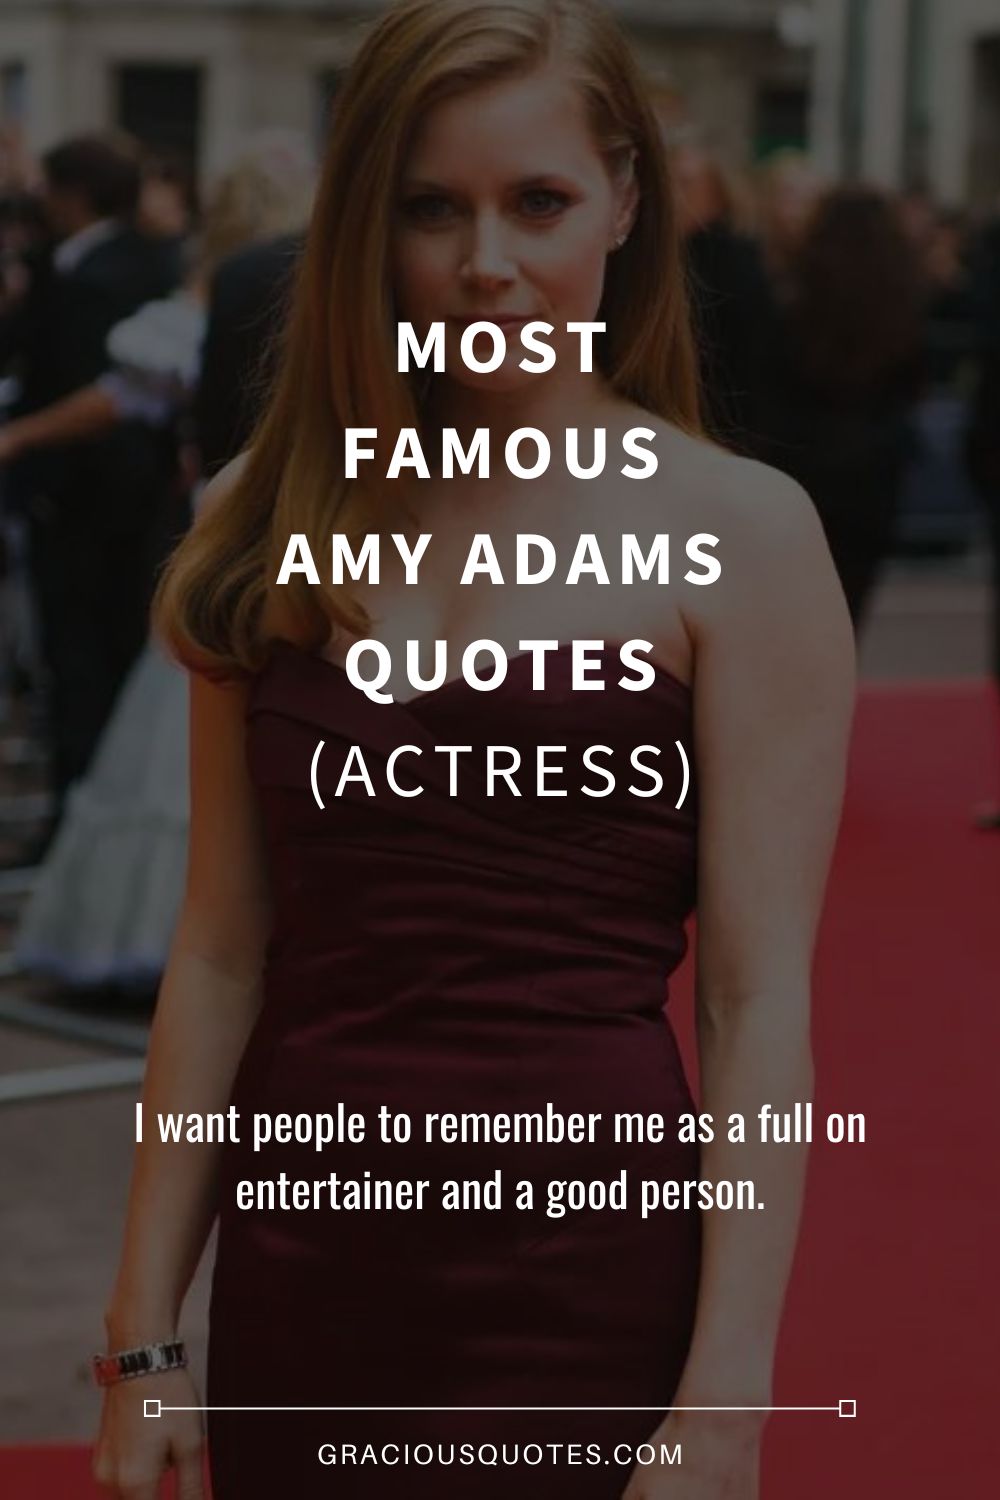 Most Famous Amy Adams Quotes (ACTRESS) - Gracious Quotes (EDITED)